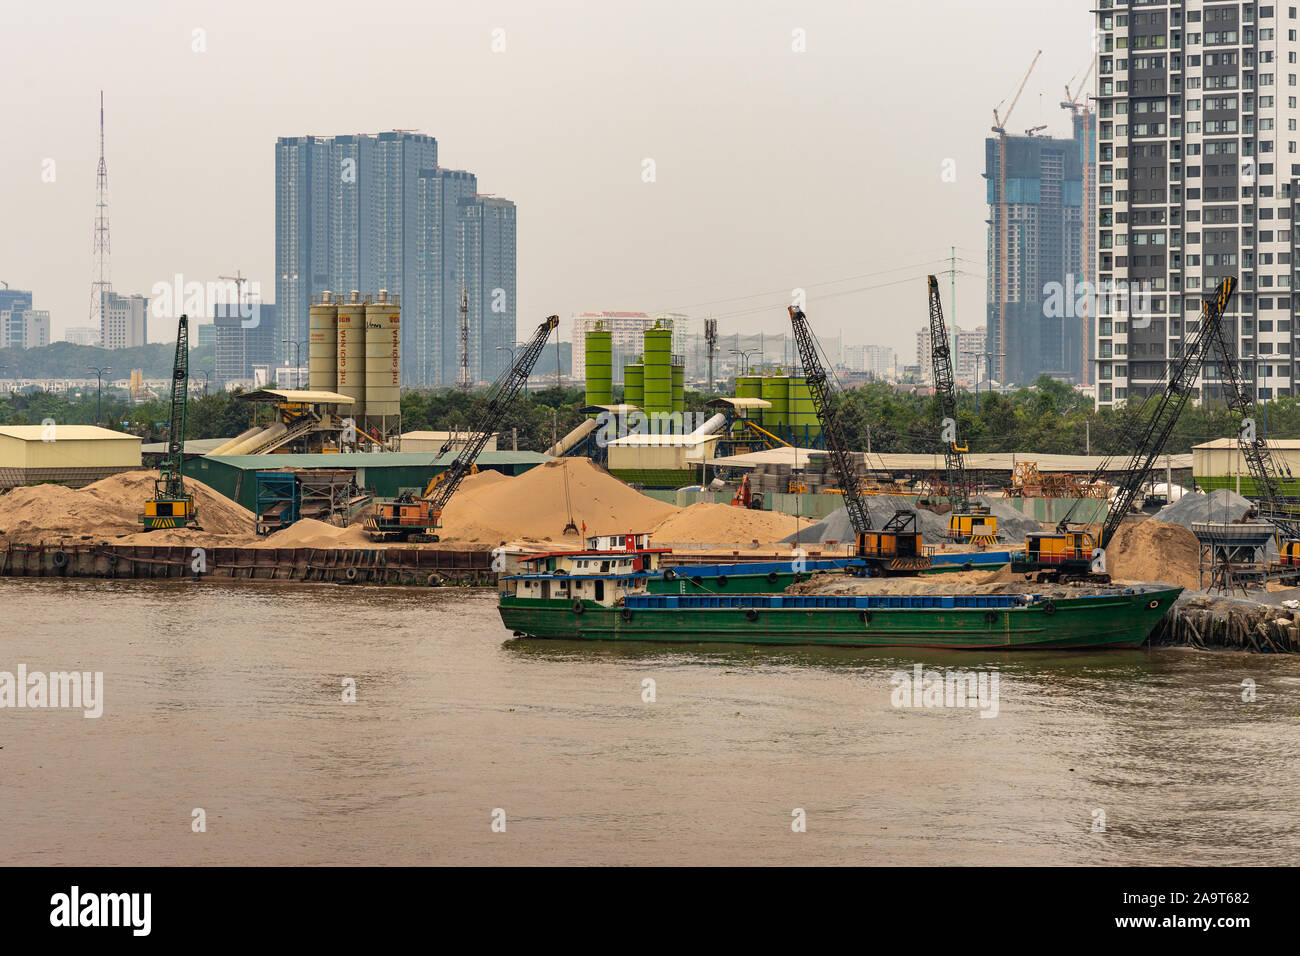 Ho Chi Minh City Vietnam - March 12, 2019: Song Sai Gon river. Green barge and many cranes and heaps of yellow sand on shore at ongoing base where con Stock Photo